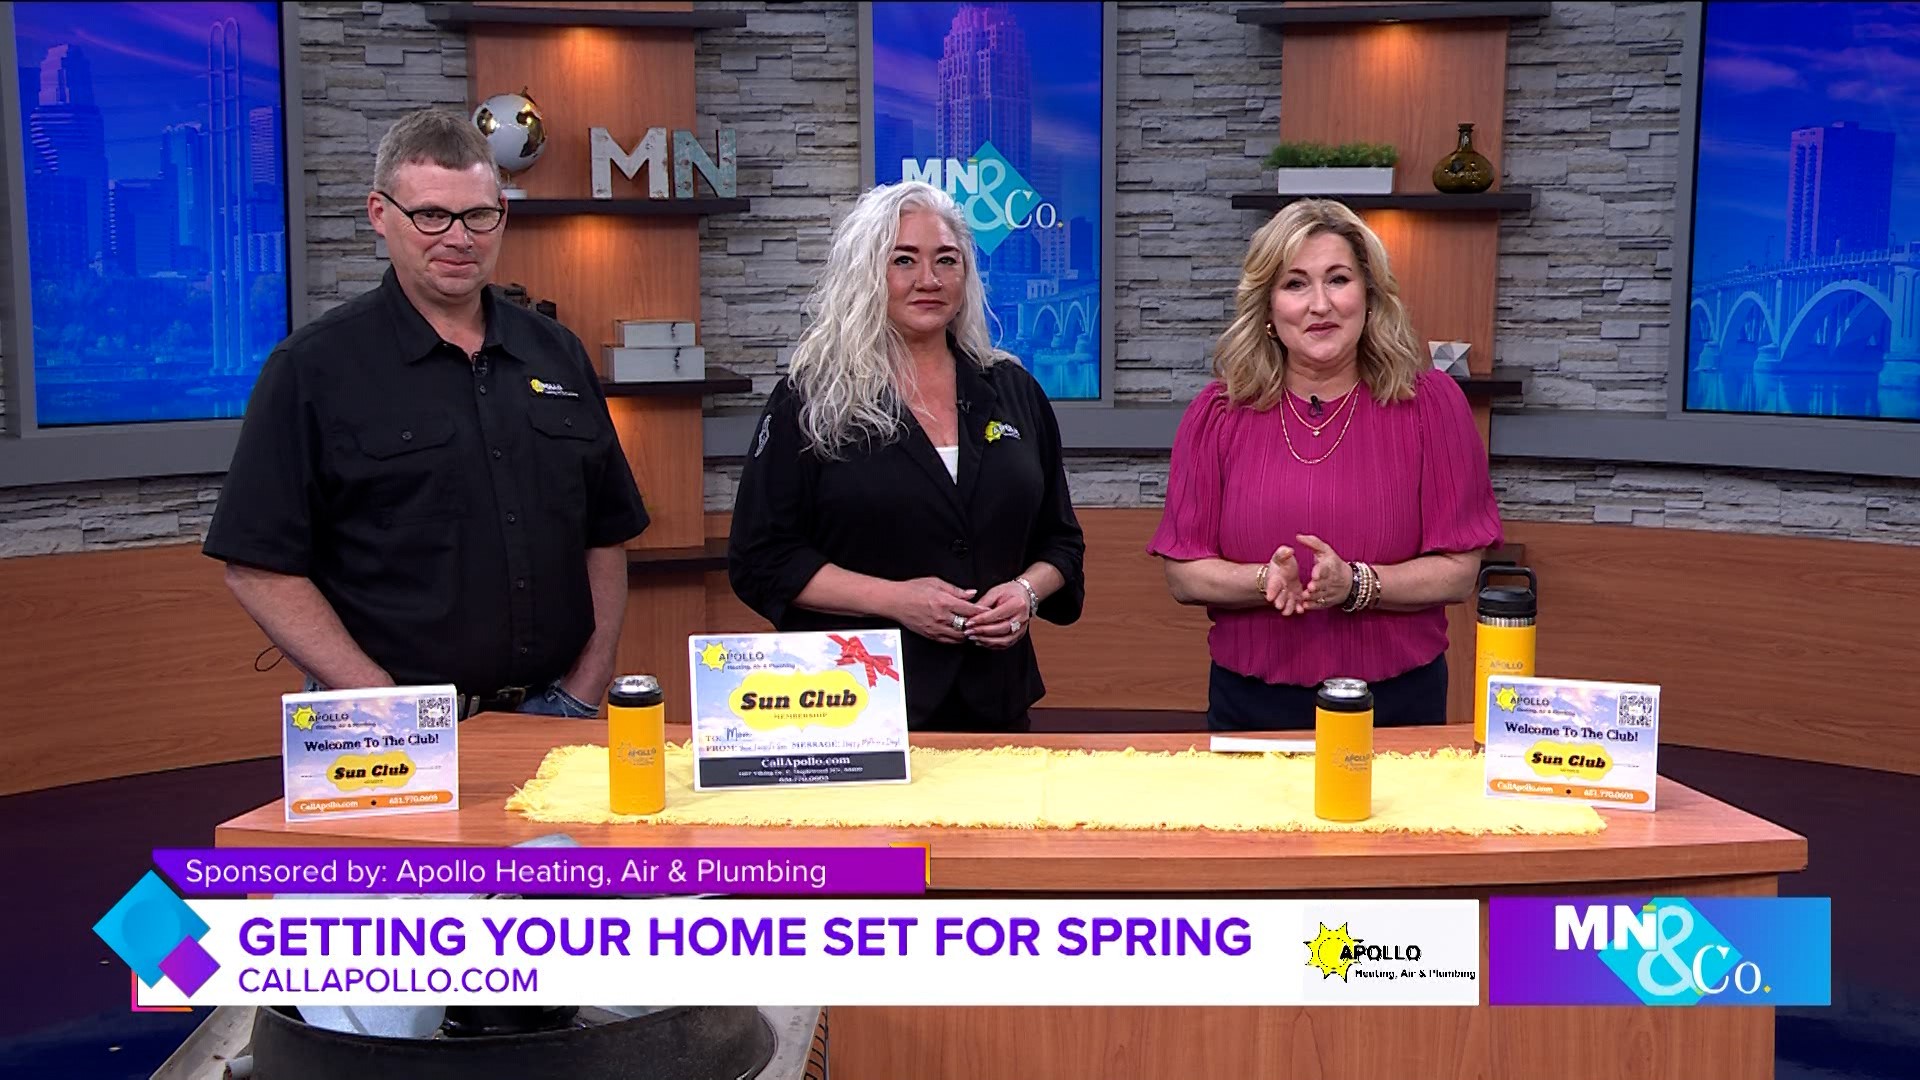 Apollo Heating, Air & Plumbing joins Minnesota and Company to discuss the importance of proper system maintenance and preparing homes for seasonal changes.